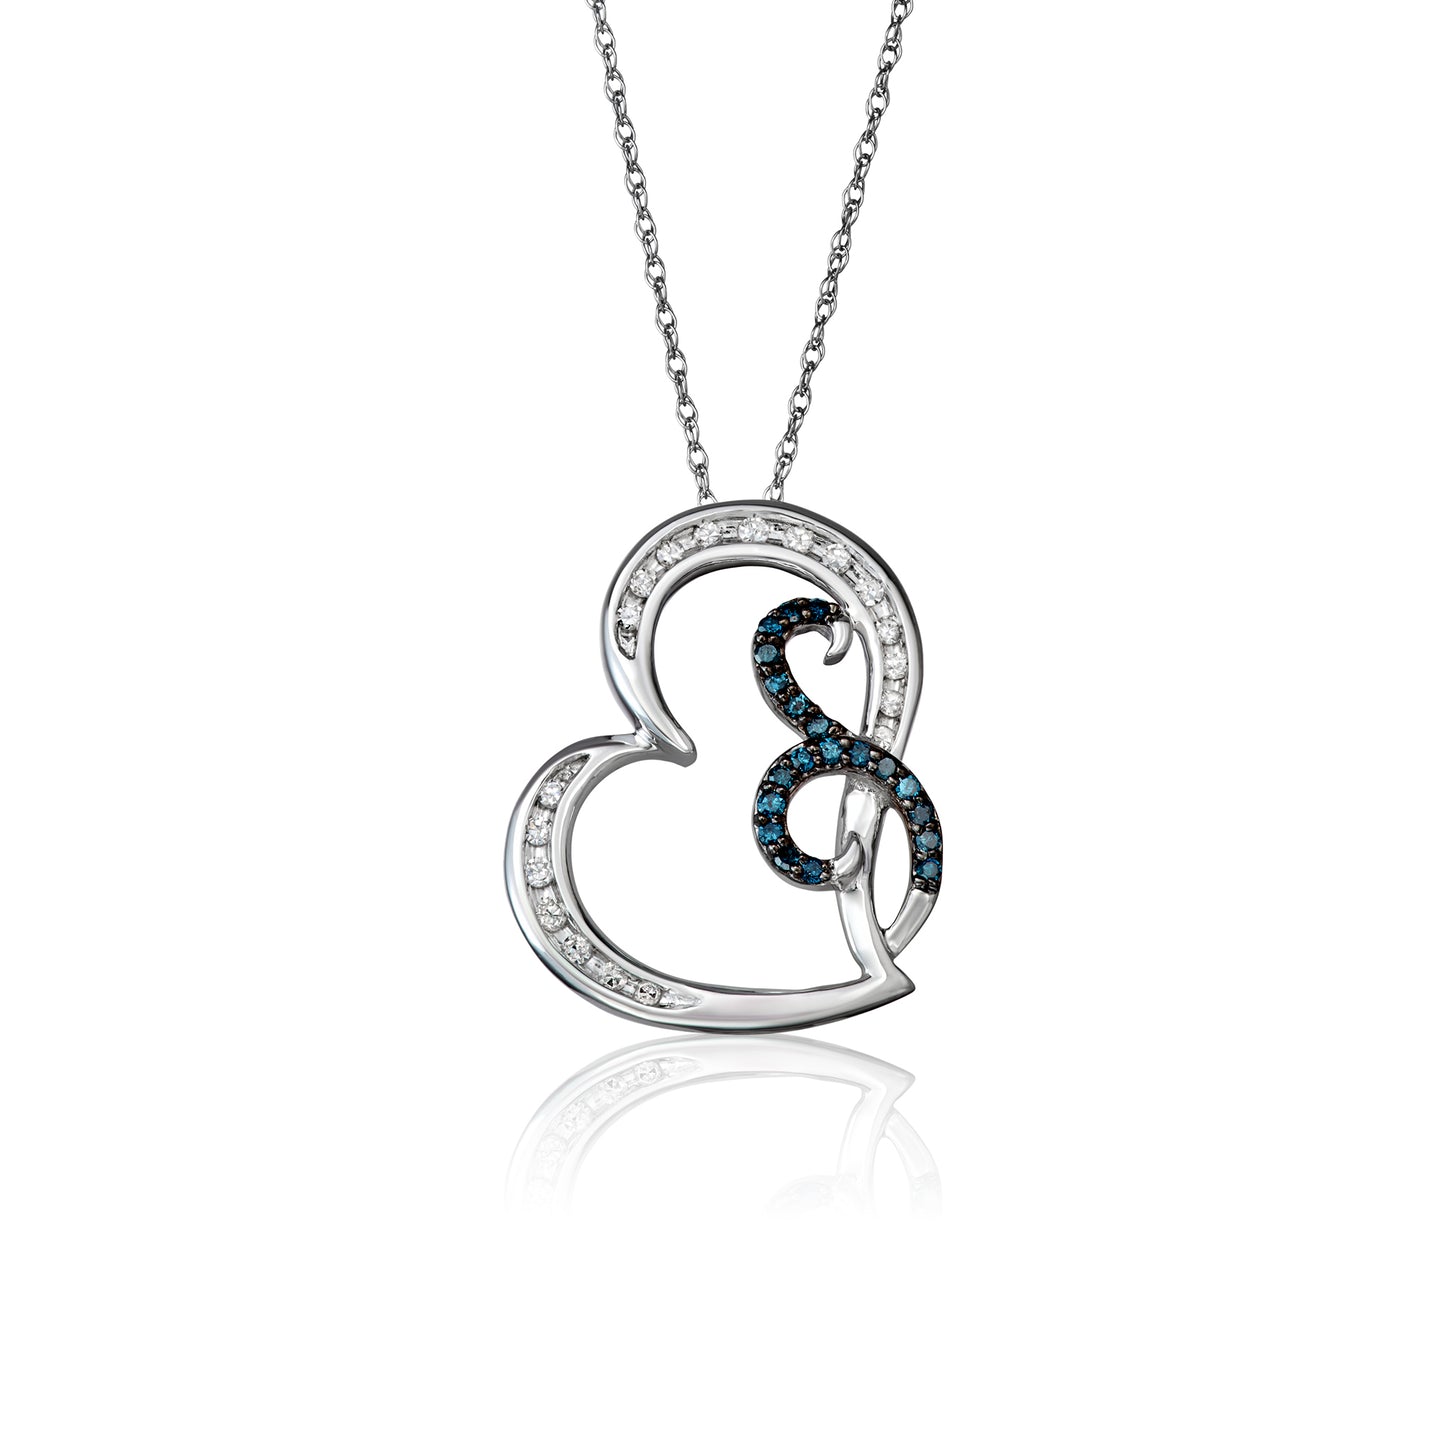 10k White Gold 0.25 ct TDW Blue and White Diamond Heart Necklace